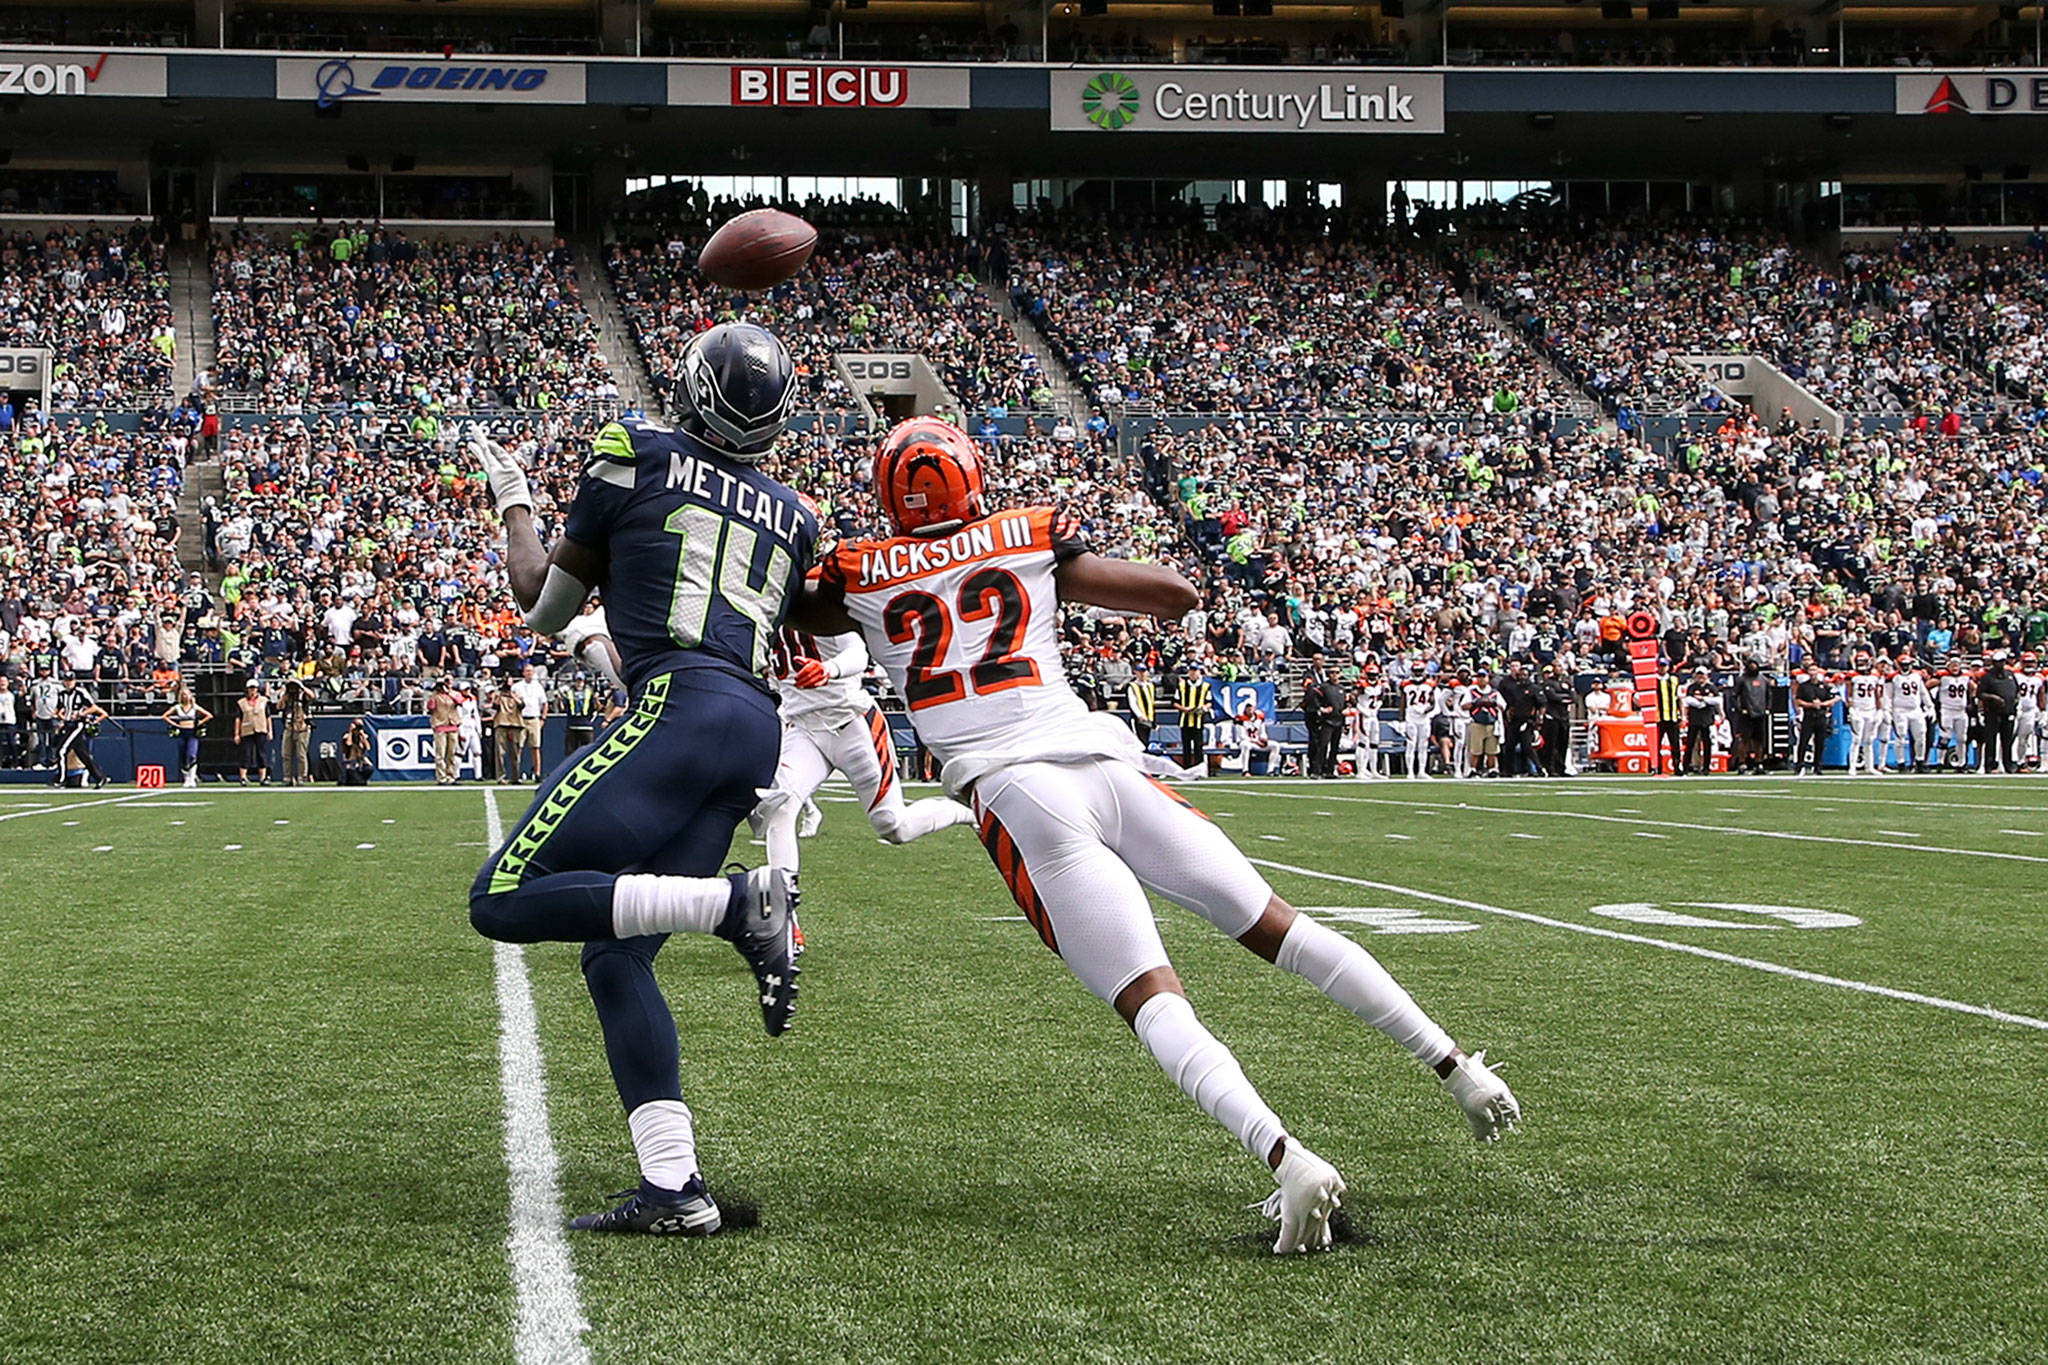 Seattle’s DK Metcalf (left) makes the catch over Cincinnati’s William Jackson III at CenturyLink Field Sunday afternoon in Seattle on September 8, 2019.(Kevin Clark / The Herald)